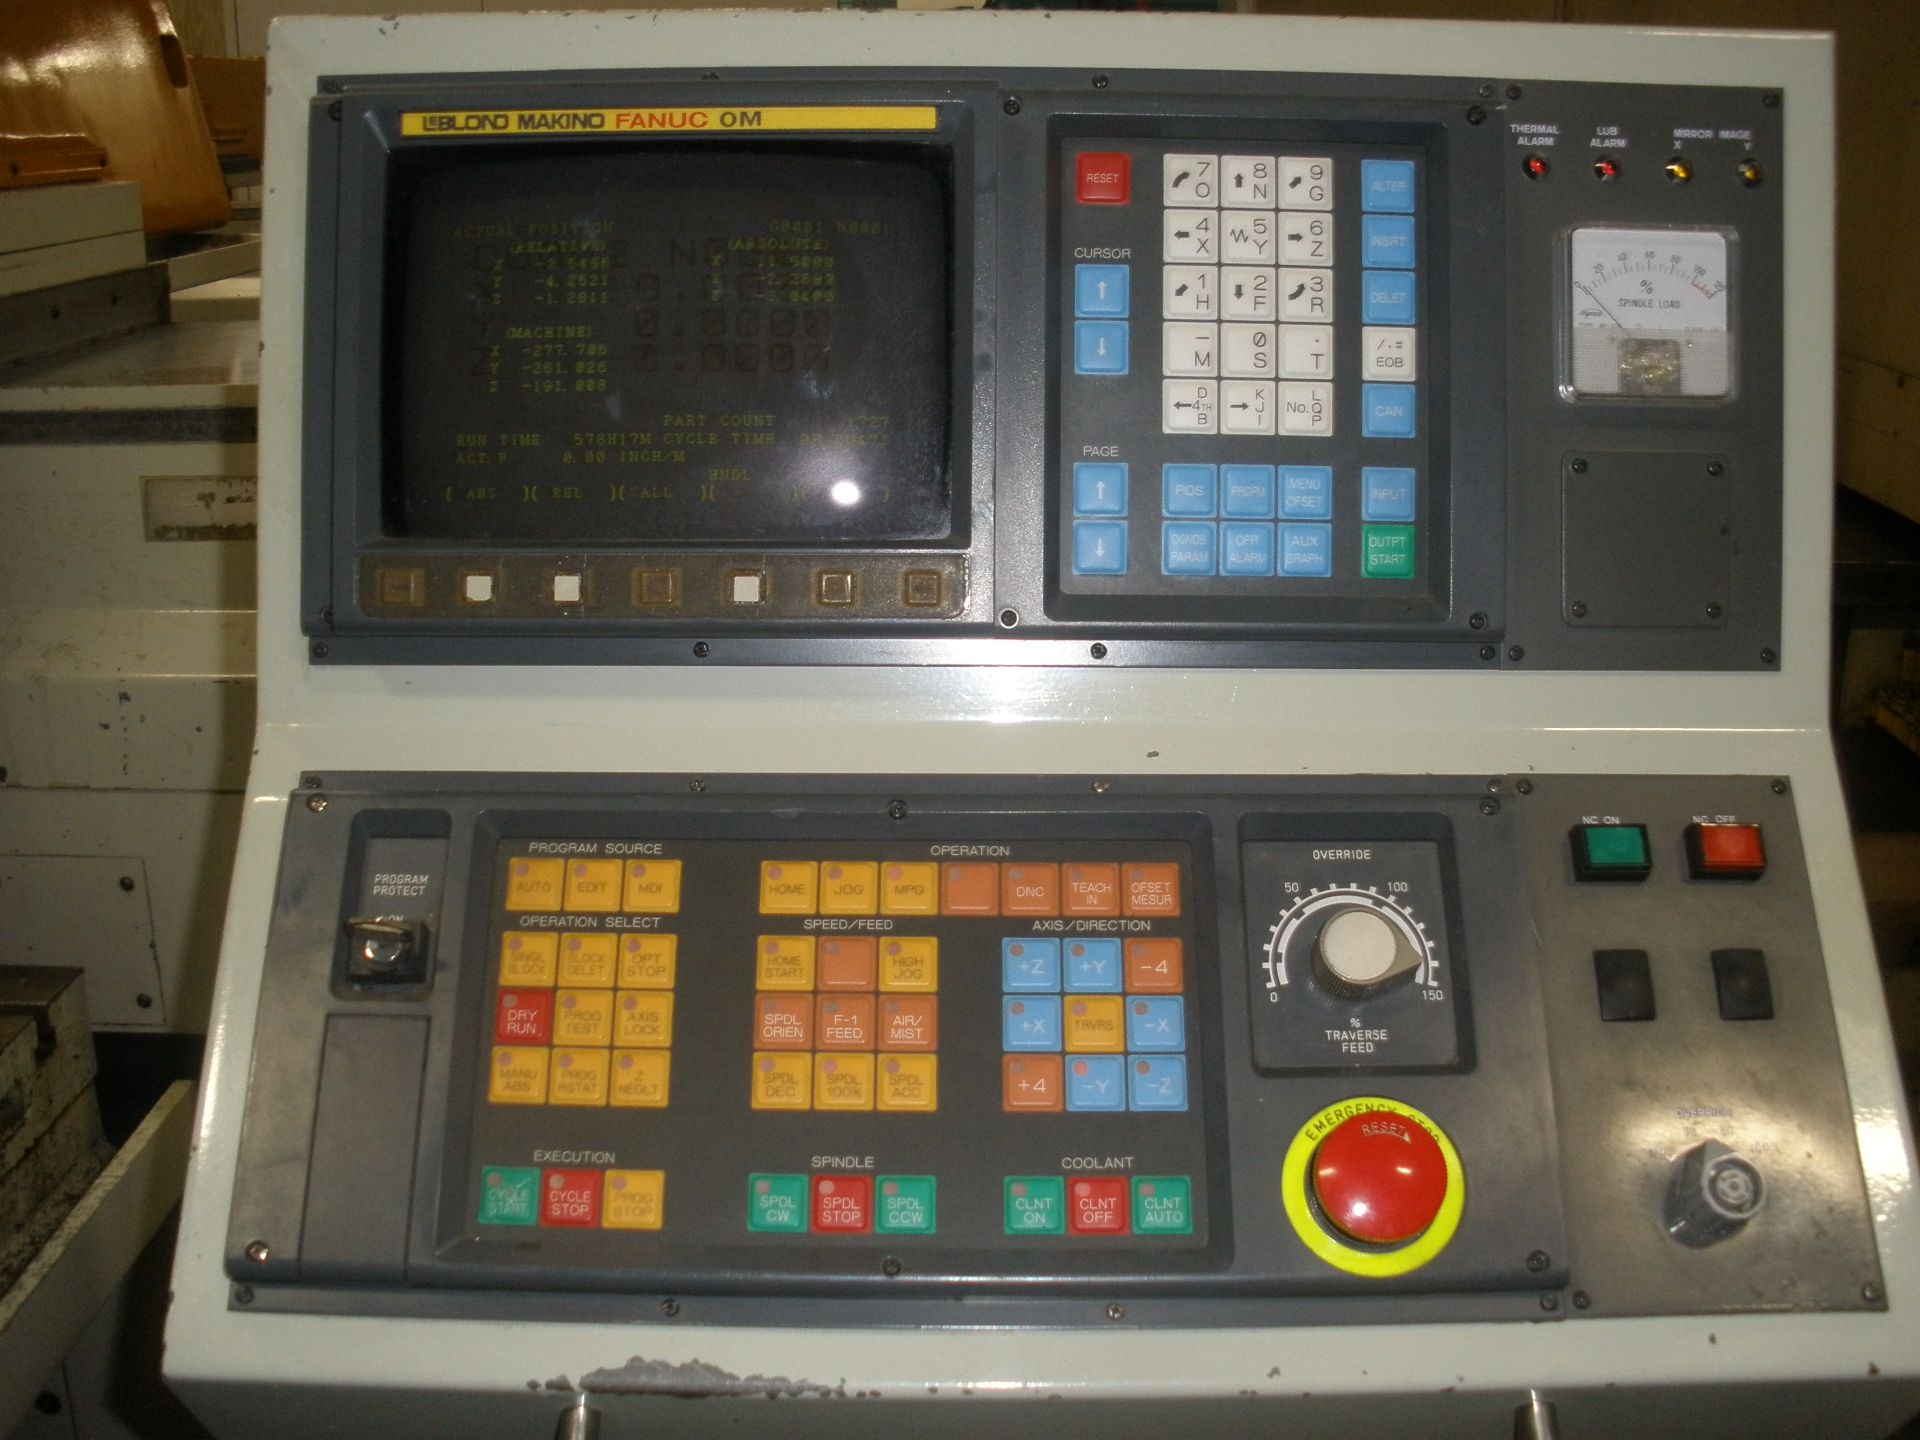 Leblond Makino RMC55 CNC Mill Fanuc OM With Video - Image 8 of 11